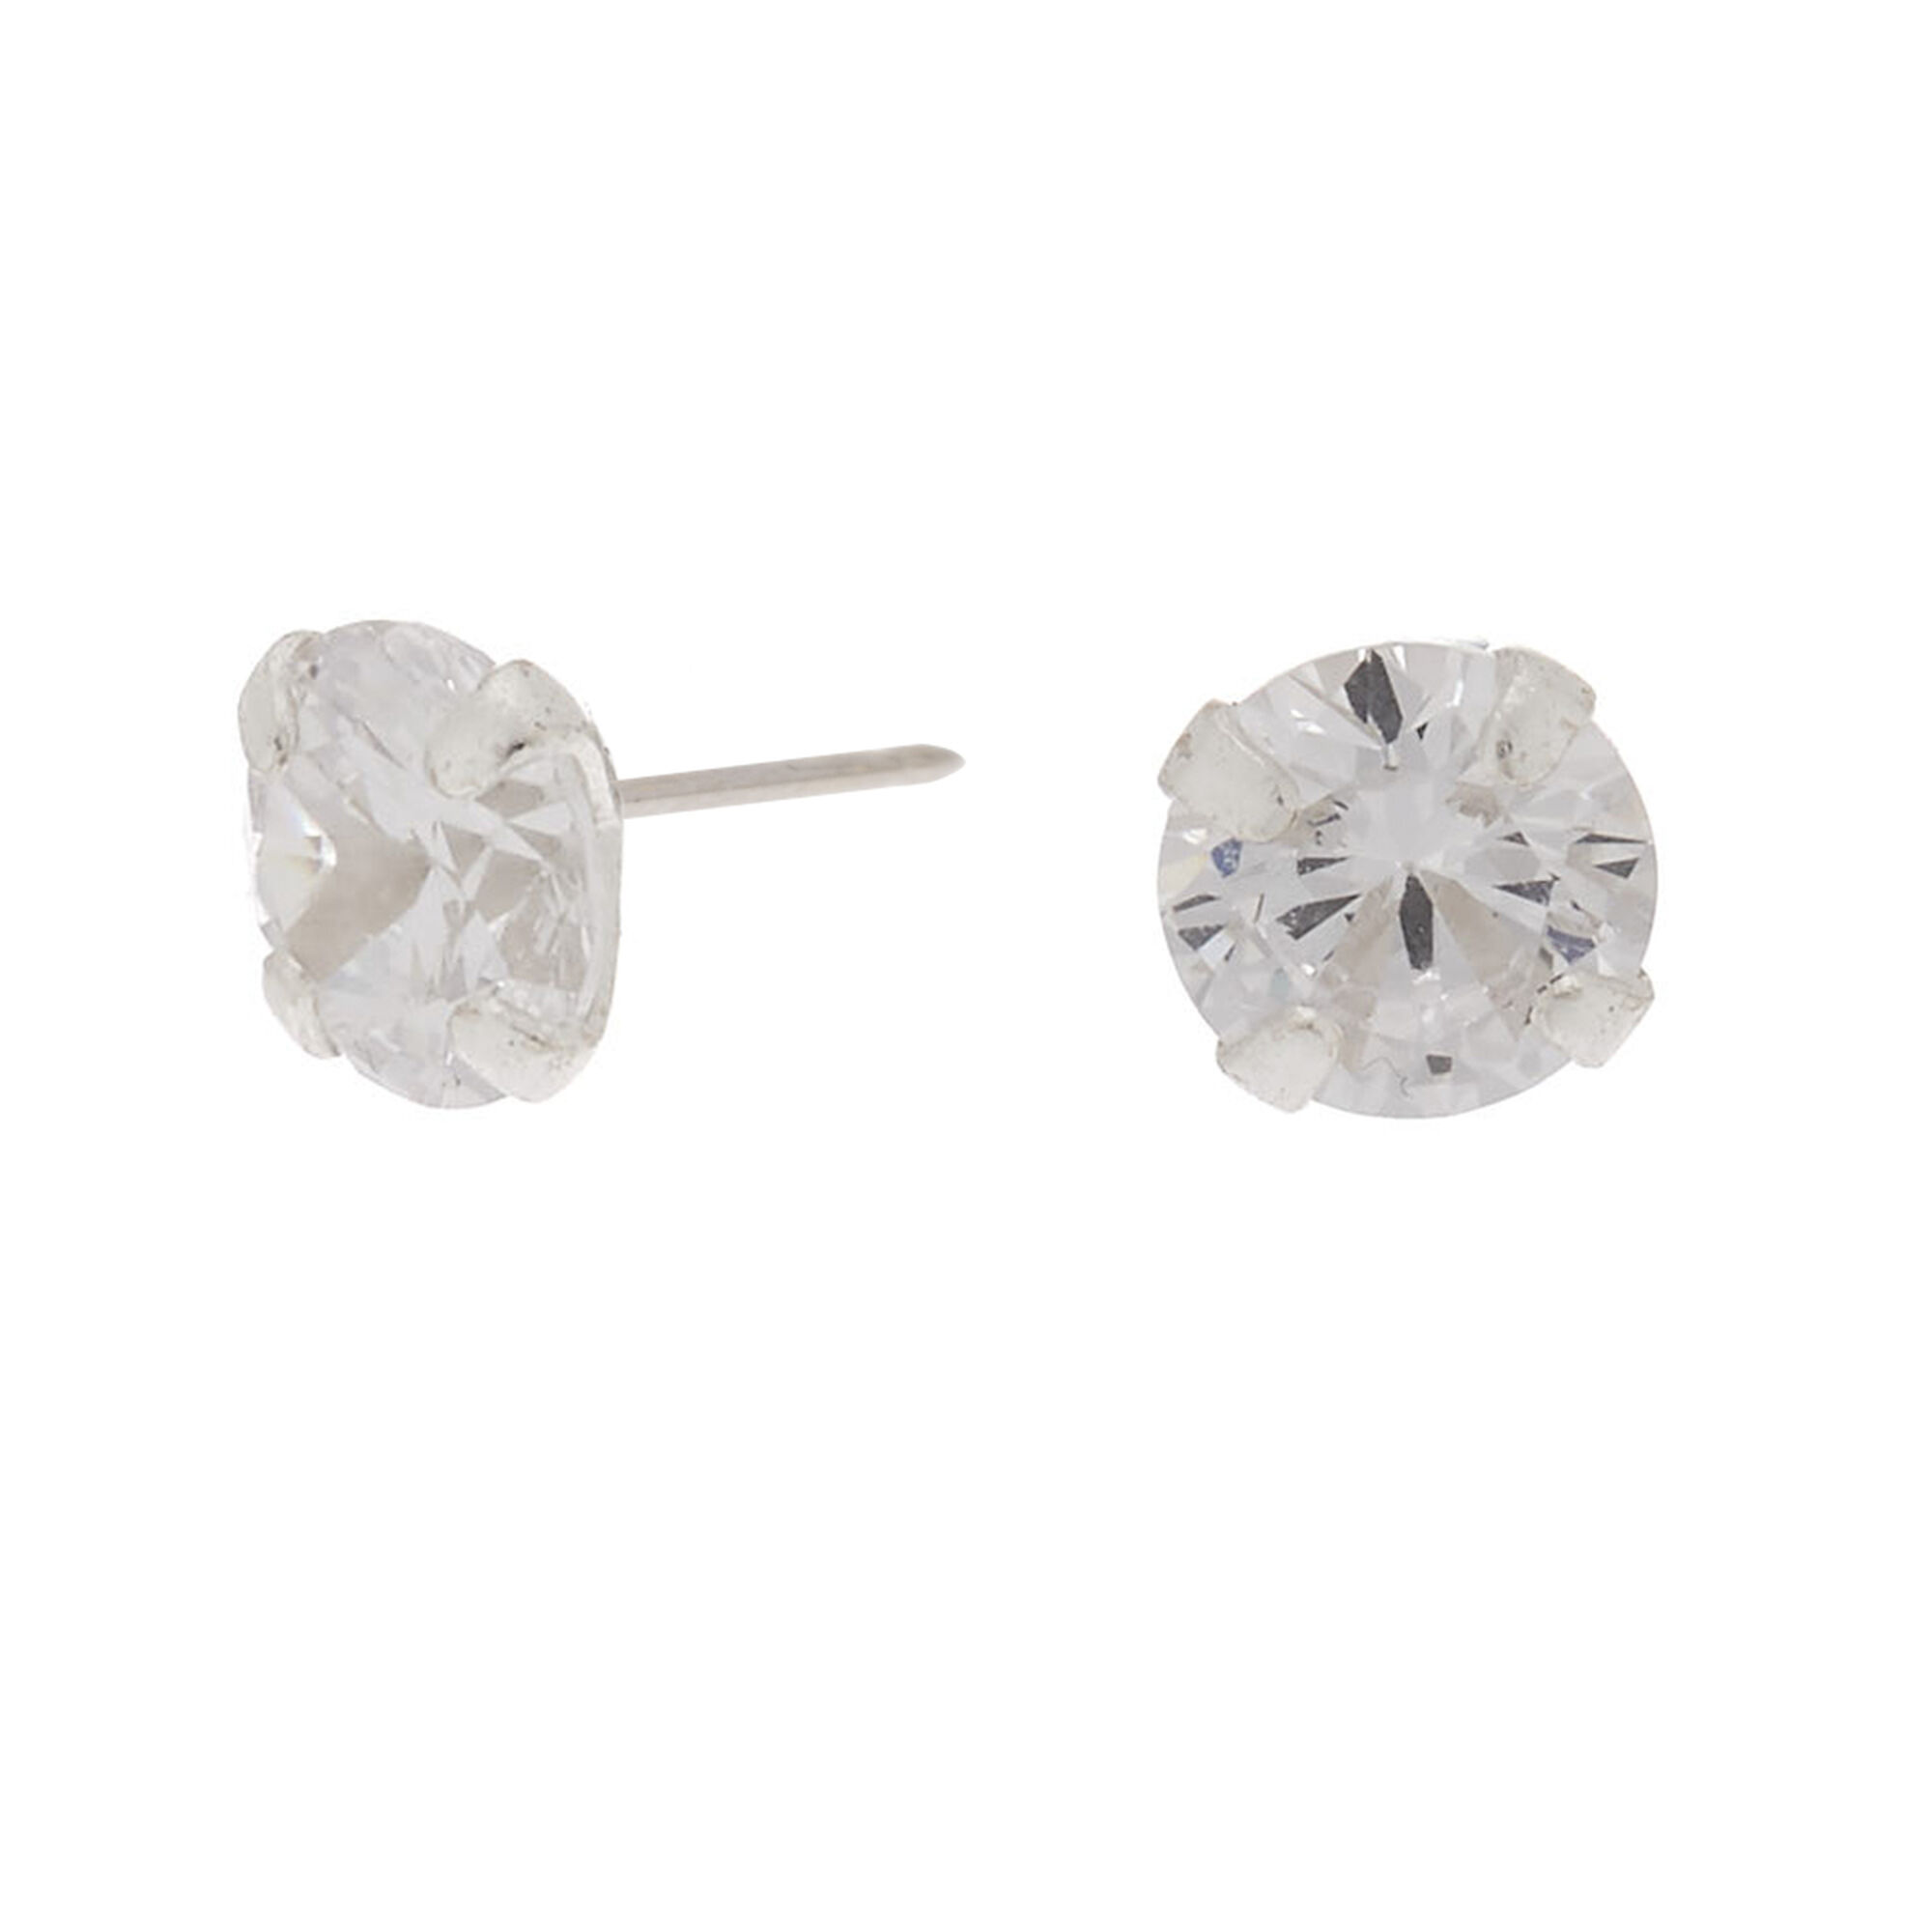 View Claires Cubic Zirconia 5MM Round Crystal Stud Earrings Silver information